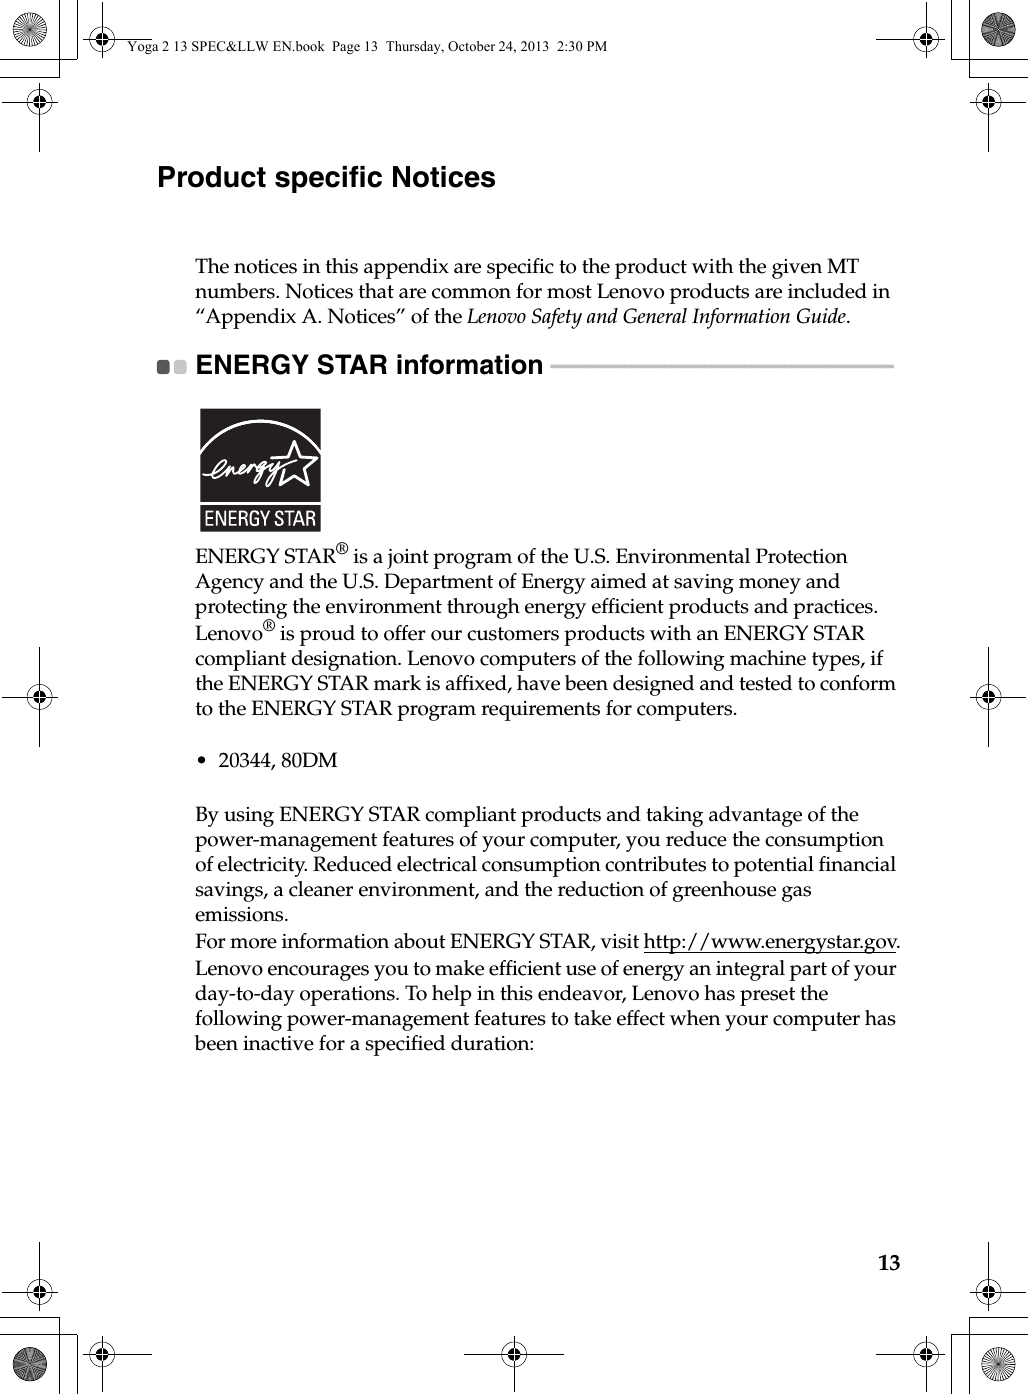 13Product specific NoticesThe notices in this appendix are specific to the product with the given MT numbers. Notices that are common for most Lenovo products are included in “Appendix A. Notices” of the Lenovo Safety and General Information Guide.ENERGY STAR information  - - - - - - - - - - - - - - - - - - - - - - - - - - - - - - - - - - - - - - - - - - - - - - - - - - - - - - - - - - - - ENERGY STAR® is a joint program of the U.S. Environmental Protection Agency and the U.S. Department of Energy aimed at saving money and protecting the environment through energy efficient products and practices.Lenovo® is proud to offer our customers products with an ENERGY STAR compliant designation. Lenovo computers of the following machine types, if the ENERGY STAR mark is affixed, have been designed and tested to conform to the ENERGY STAR program requirements for computers.• 20344, 80DMBy using ENERGY STAR compliant products and taking advantage of the power-management features of your computer, you reduce the consumption of electricity. Reduced electrical consumption contributes to potential financial savings, a cleaner environment, and the reduction of greenhouse gas emissions.For more information about ENERGY STAR, visit http://www.energystar.gov.Lenovo encourages you to make efficient use of energy an integral part of your day-to-day operations. To help in this endeavor, Lenovo has preset the following power-management features to take effect when your computer has been inactive for a specified duration:Yoga 2 13 SPEC&amp;LLW EN.book  Page 13  Thursday, October 24, 2013  2:30 PM